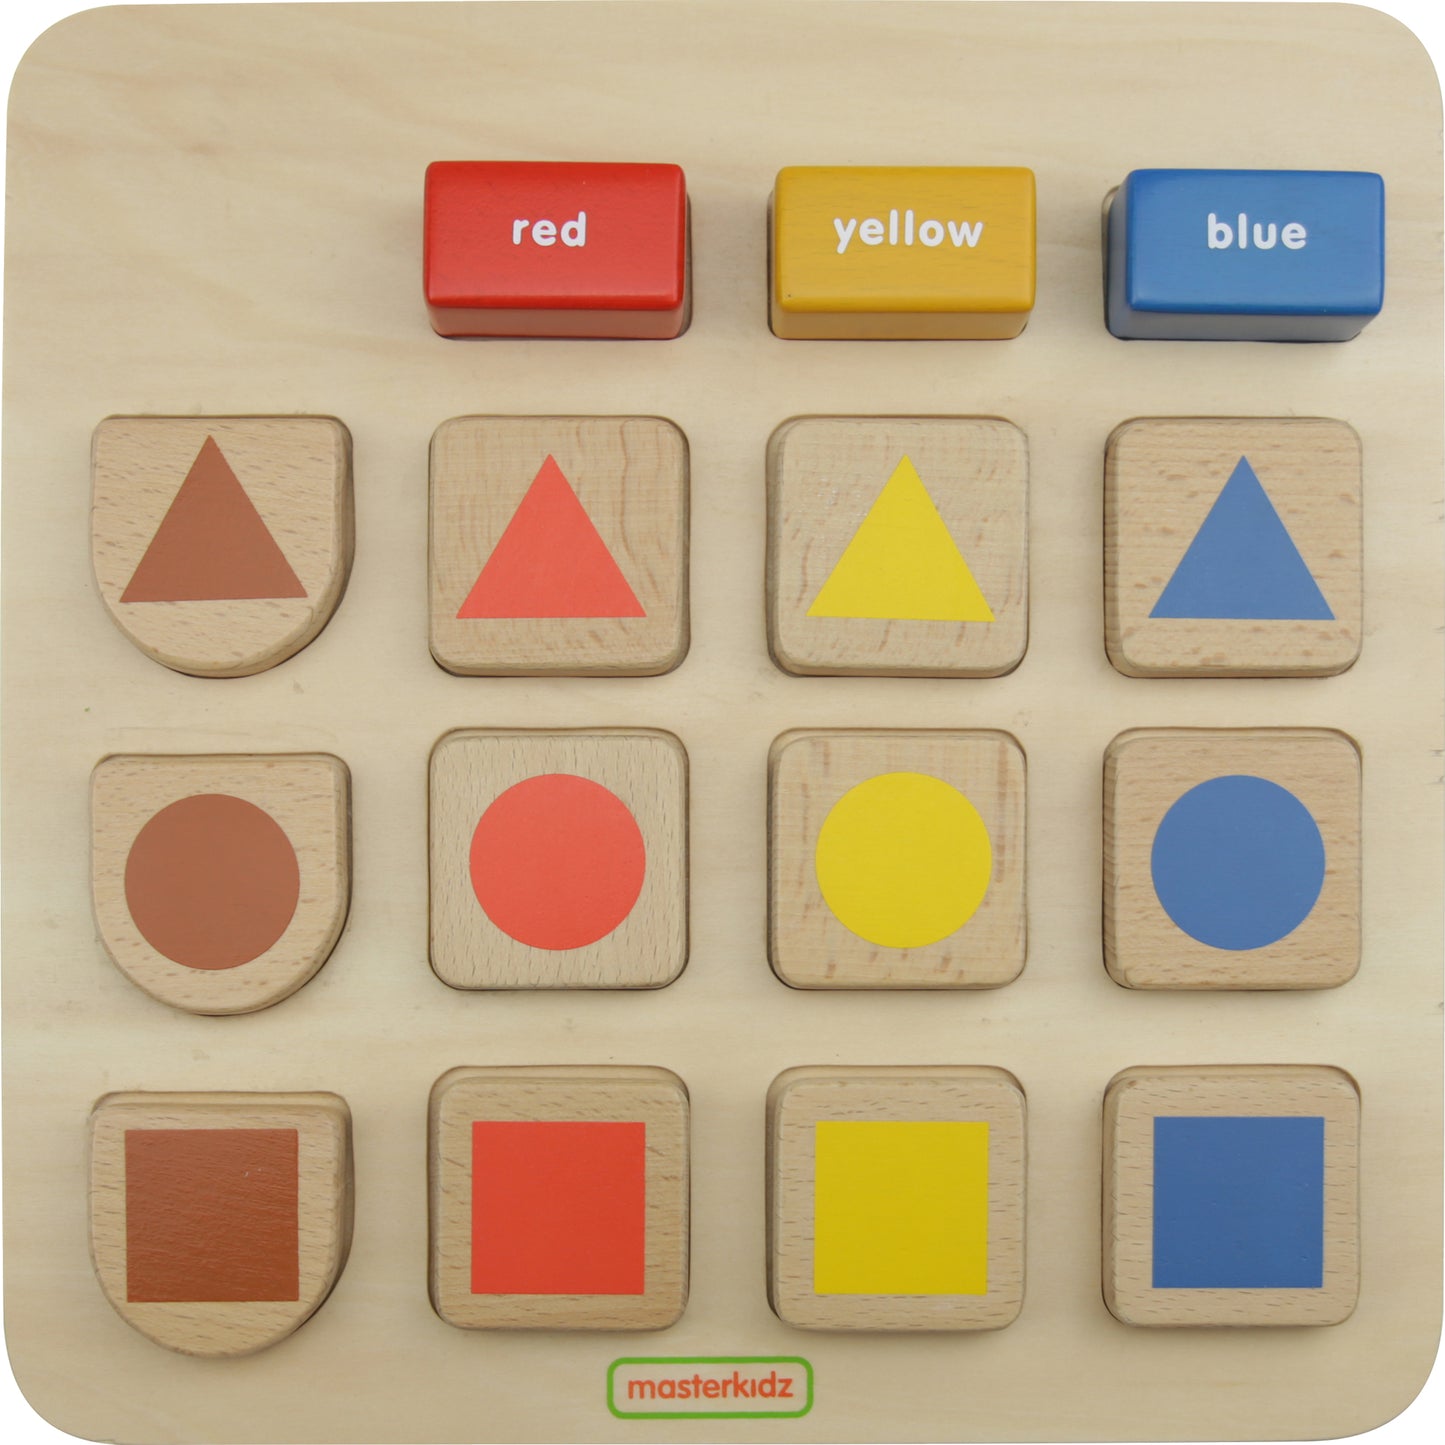 Masterkidz Sorting and Grouping Shapes & Colours 分類及配對學習板 - 形狀與顏色